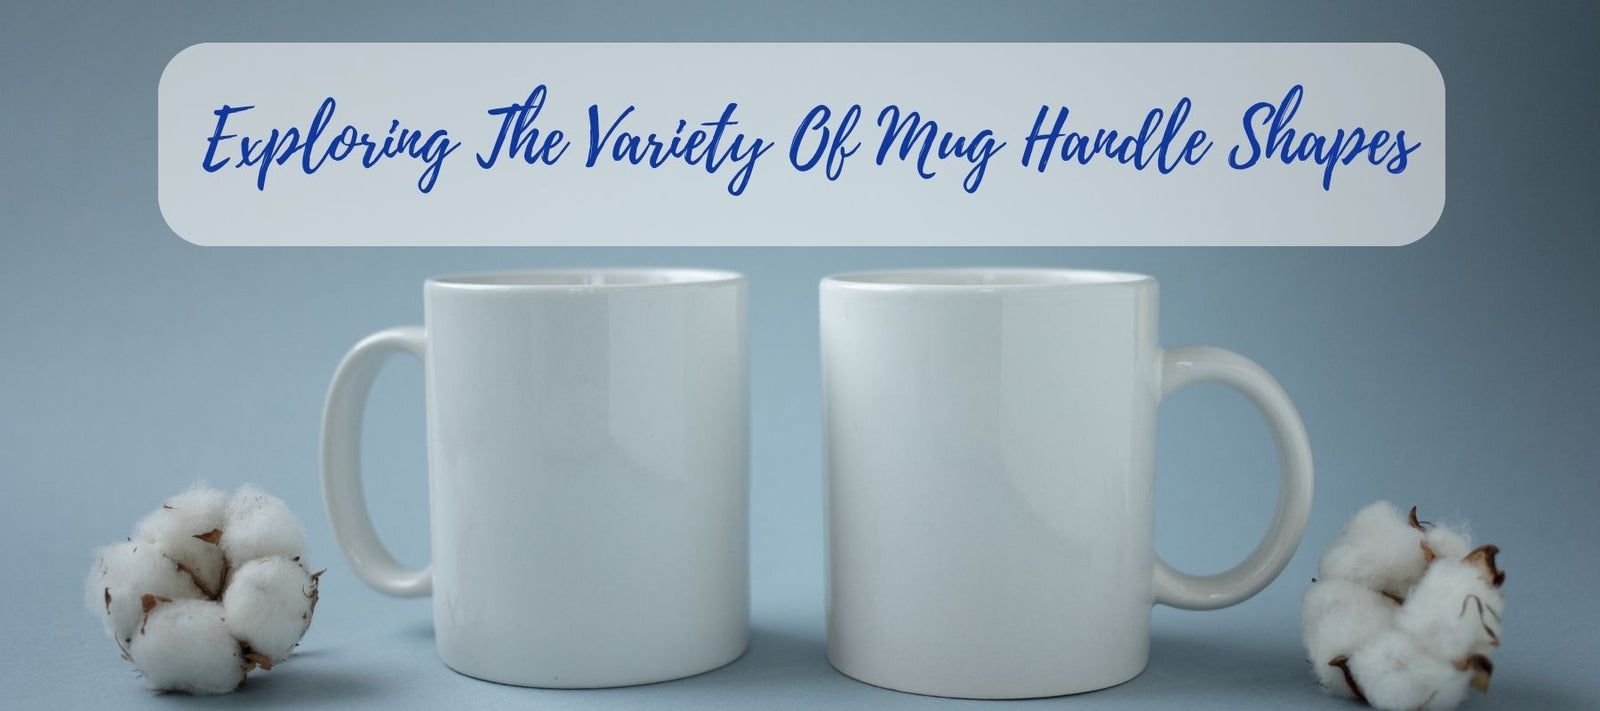 What Are Different Mug Handle Shapes & Styles? - Unifury